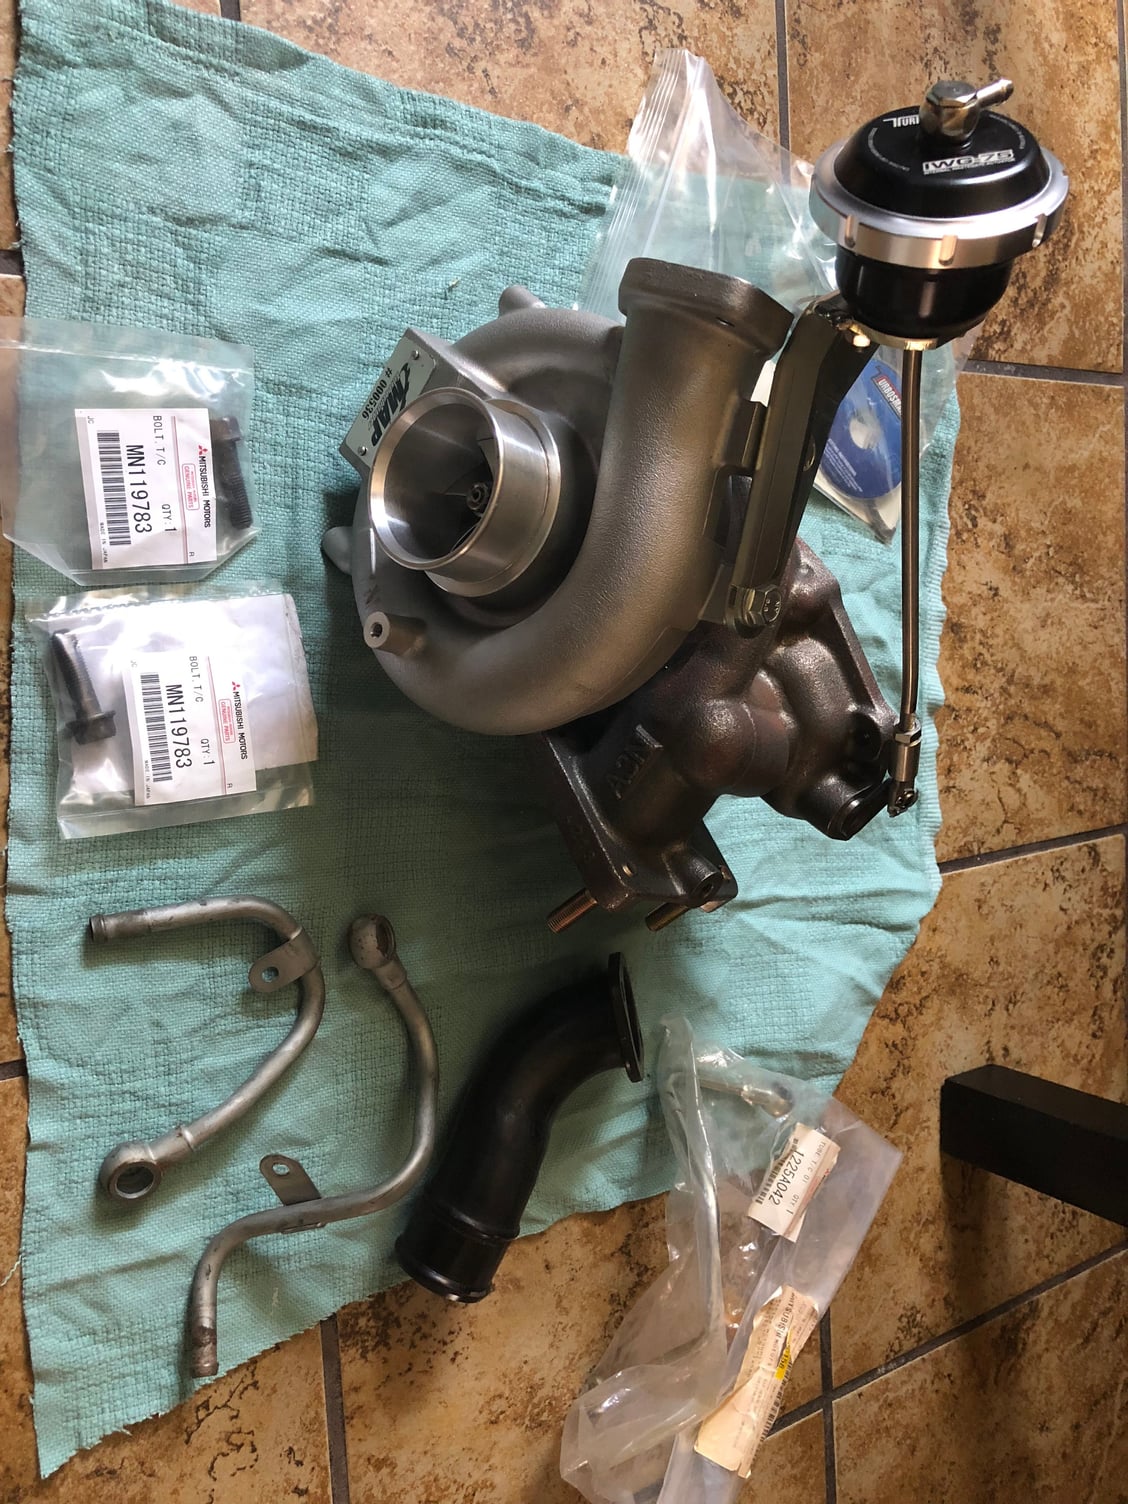 Engine - Power Adders - Evo 8/9 Parts Turbo, Injector, Down Pipe, Steering, Quick Release - New - 2003 to 2006 Mitsubishi Lancer Evolution - Los Angeles, CA 90026, United States